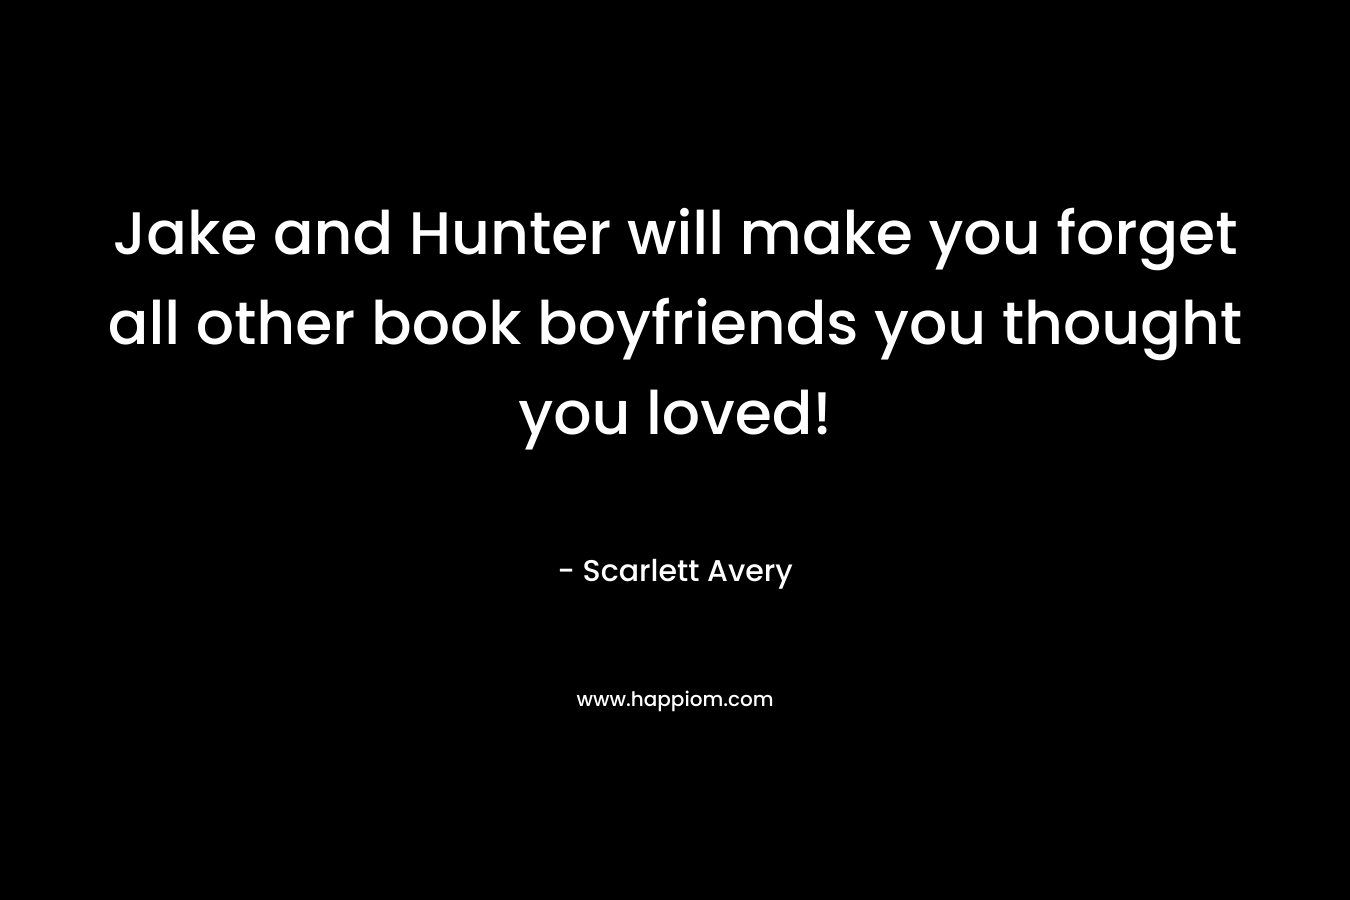 Jake and Hunter will make you forget all other book boyfriends you thought you loved!